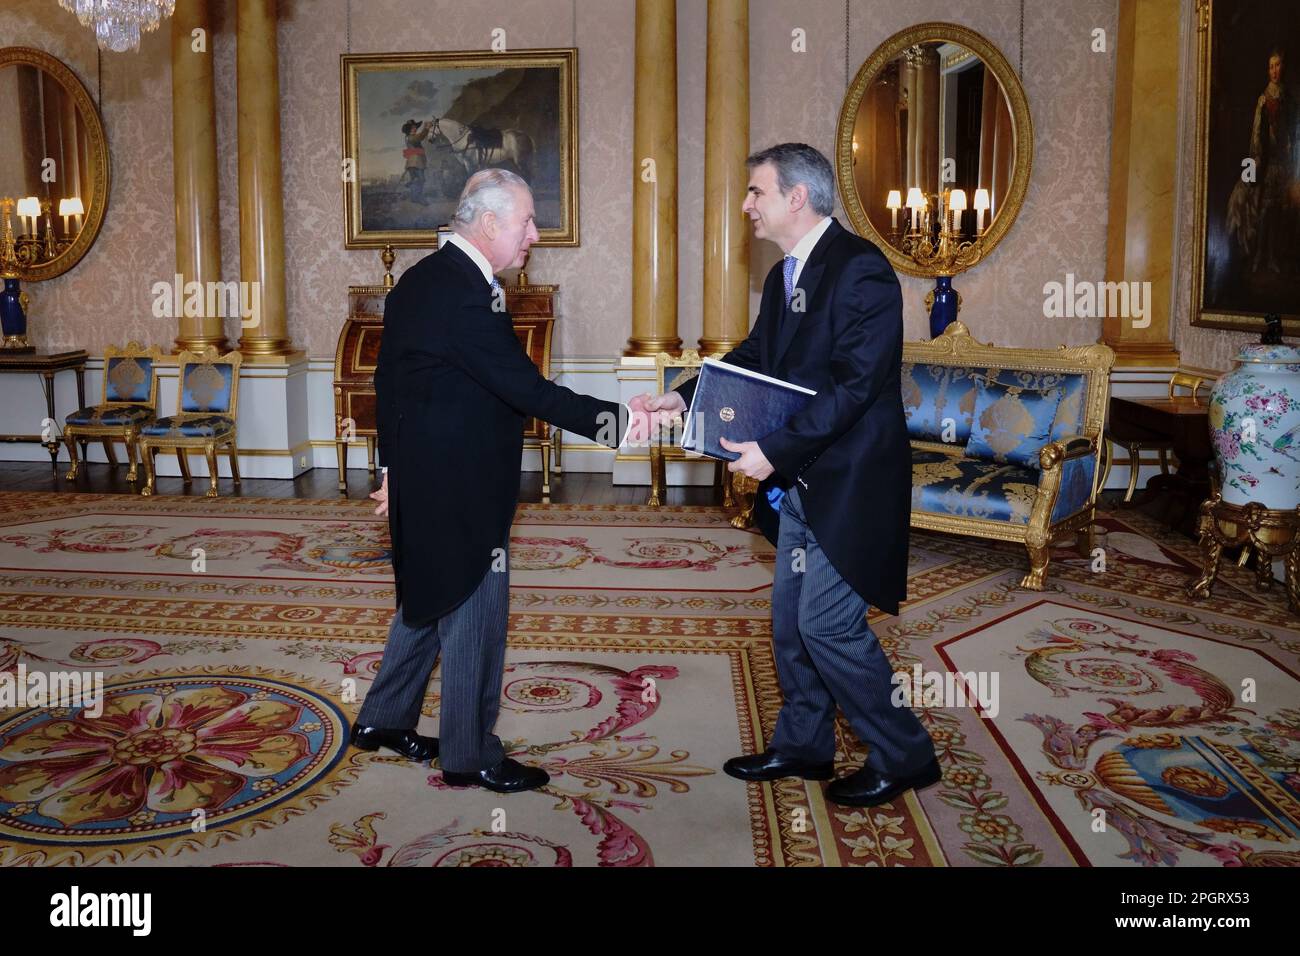 RETRANSMITTING CORRECTING NAME OF AMBASSADOR King Charles III receives the Ambassador of Greece, Yannis Tsaousis, as he presents his credentials during a private audience at Buckingham Palace, London. Picture date: Thursday March 2, 2023. Stock Photo